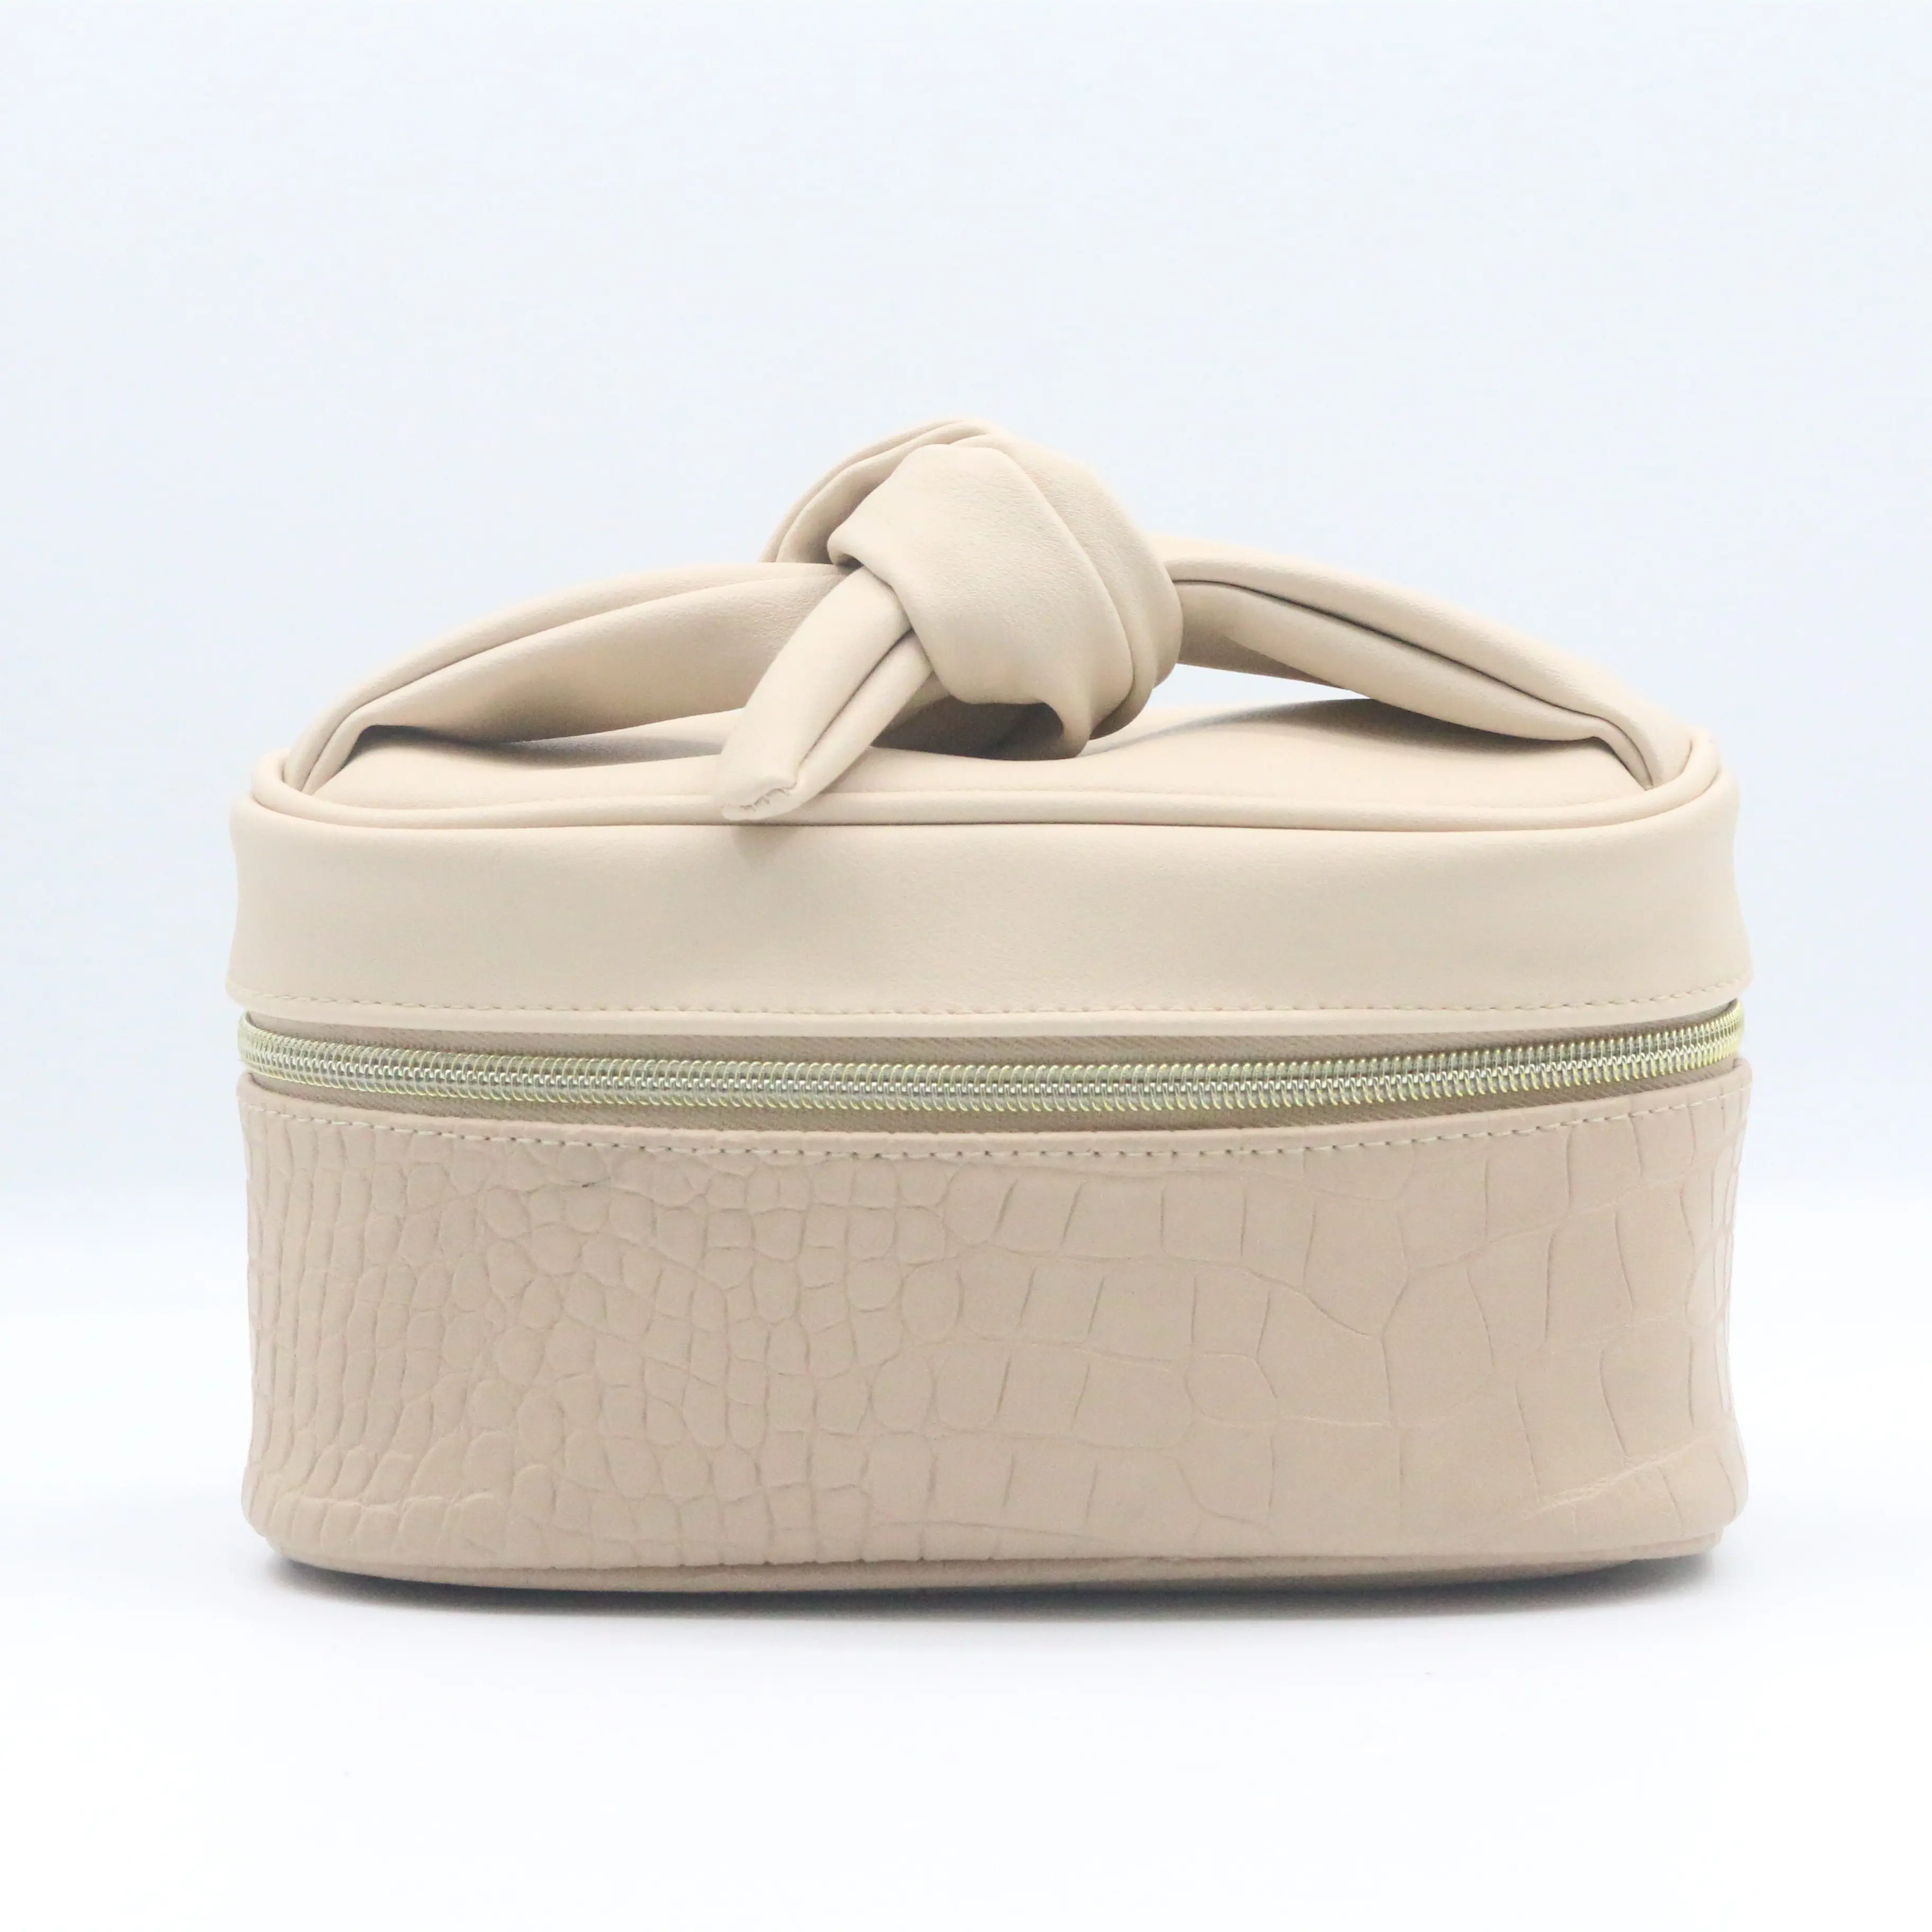 Sandy Beige Water-based PU Cosmetic Pouch Untie Bowknot Handle Perfectly Pale Class Alligator Pattern Waterproof PU Toiletry Bag